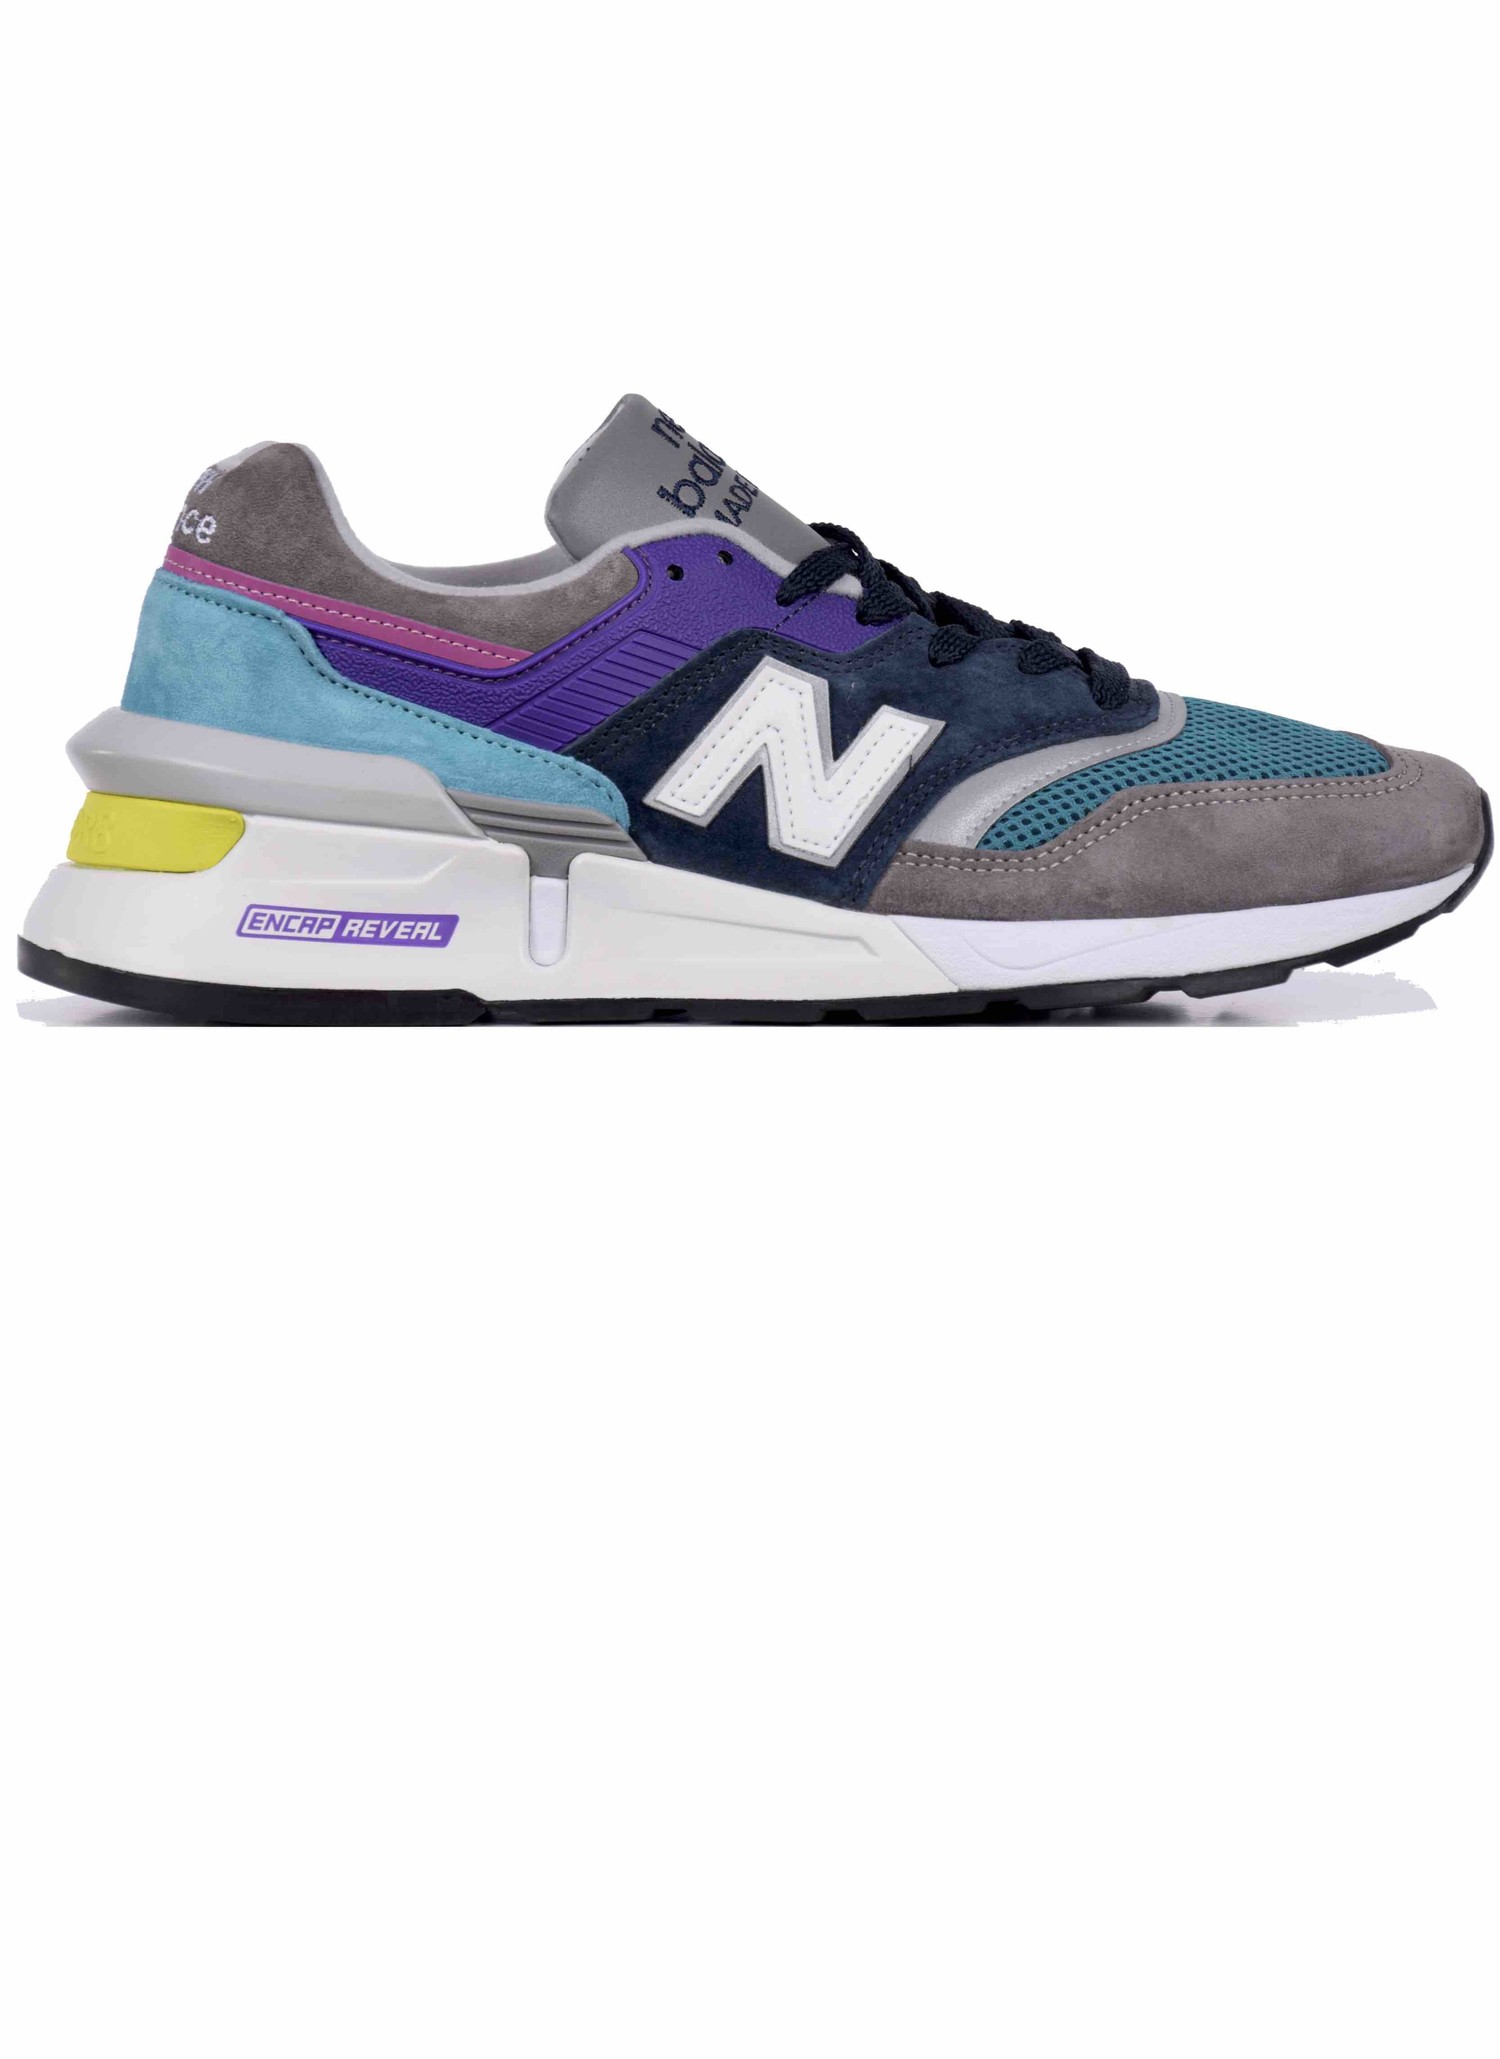 New Balance M 997 SMG "Made in USA" Sneakers Grey | HALO HALO